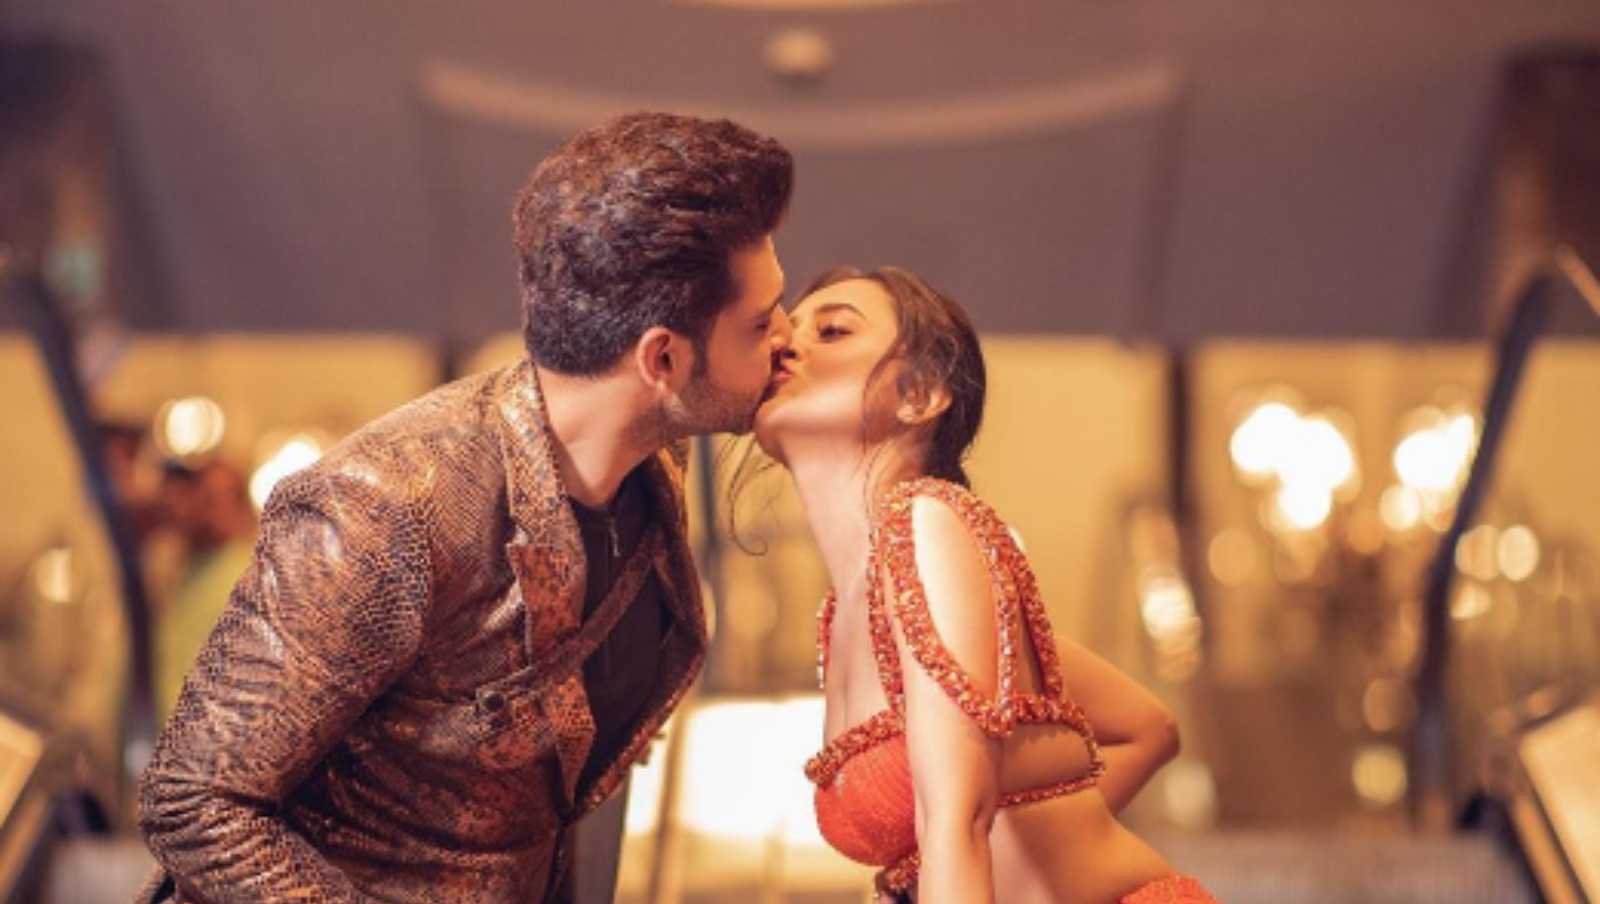 It's a relief for TejRan fans, Tejasswi Prakash and Karan Kundrra just put their breakup rumors to an end in the cutest manner